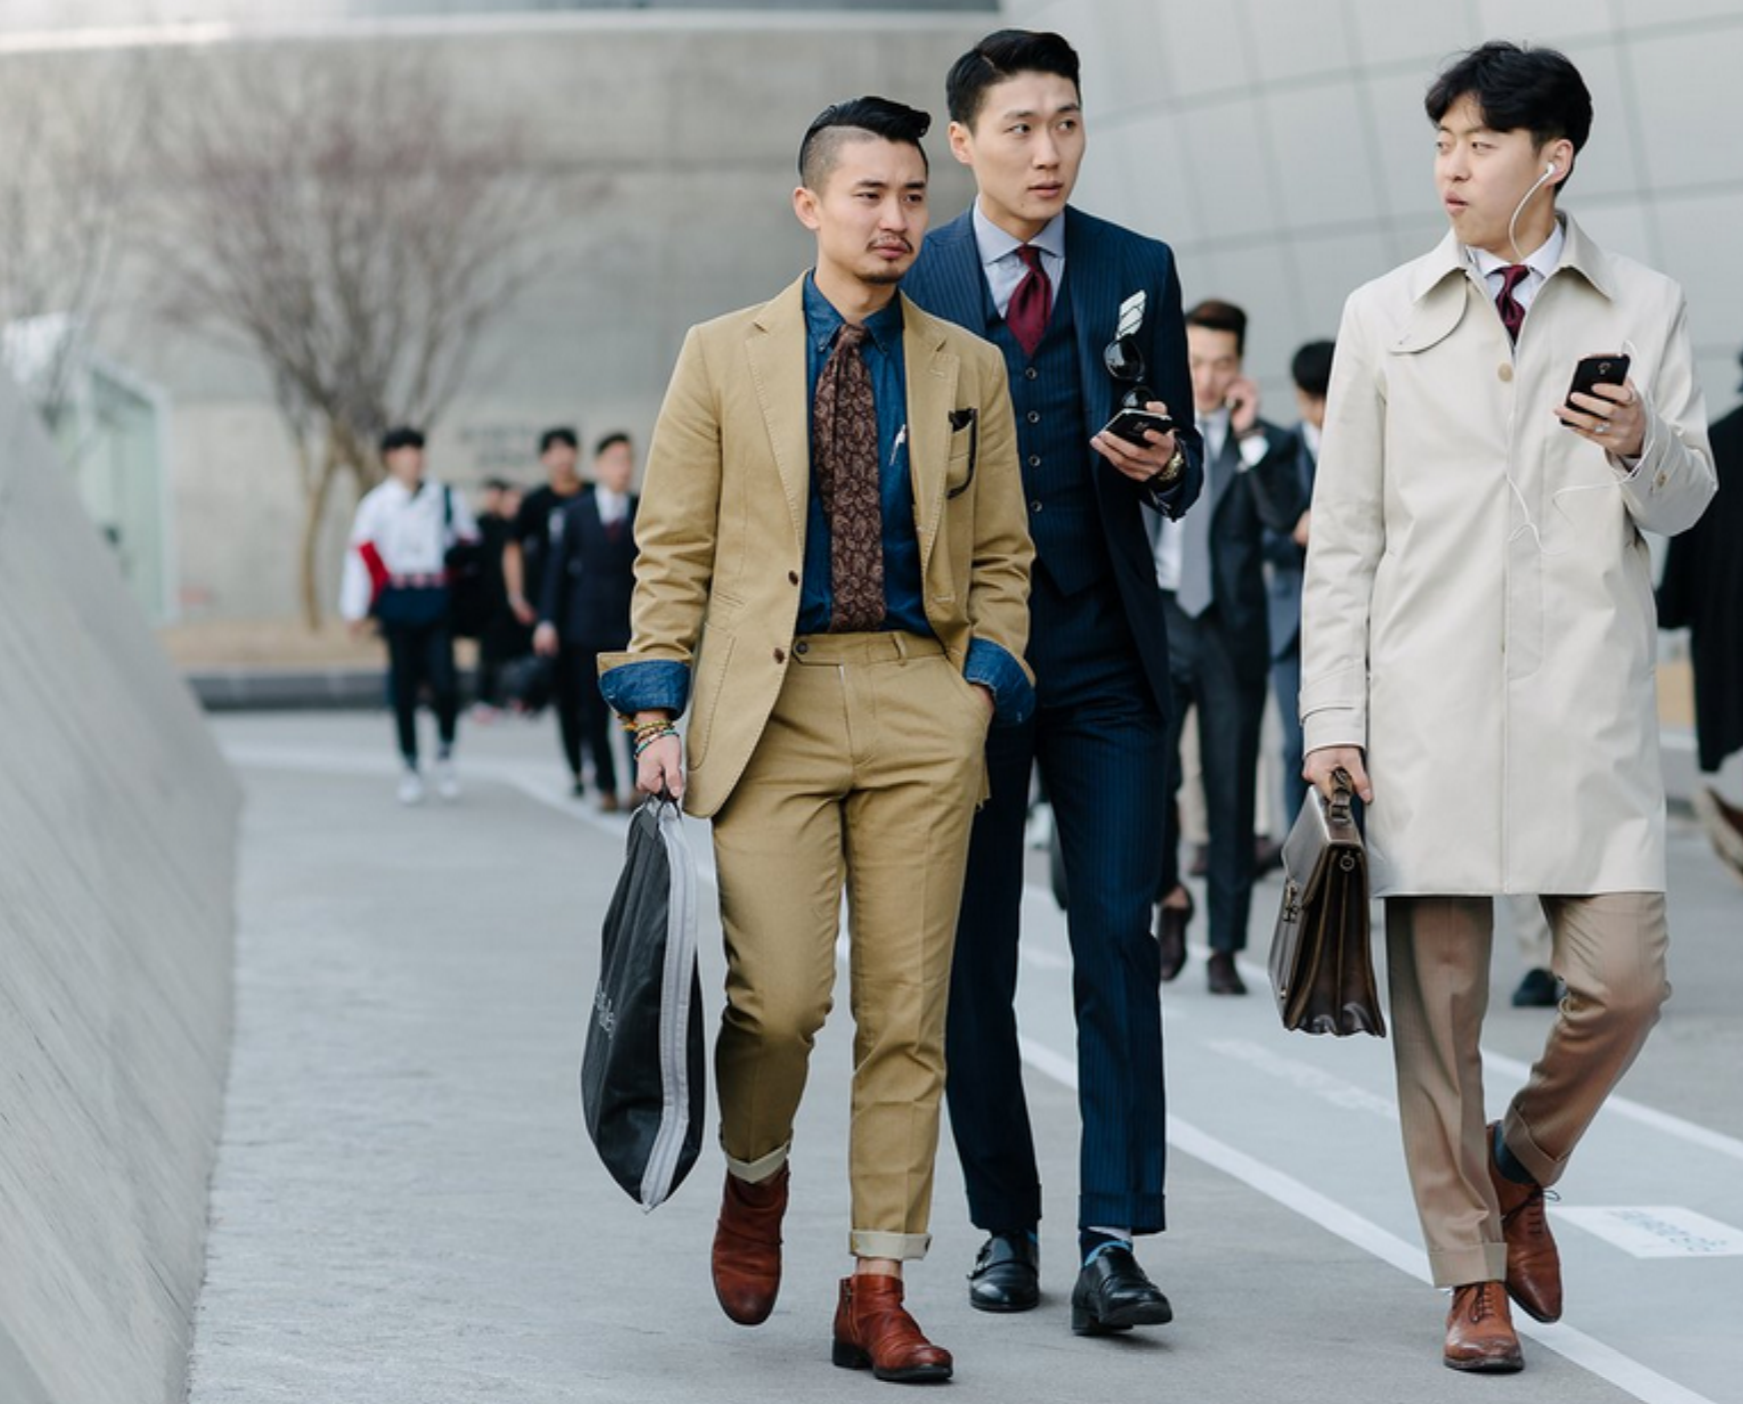 From 'Bling Kings' to 'Aficionados': Understanding China's Mass Affluent Males